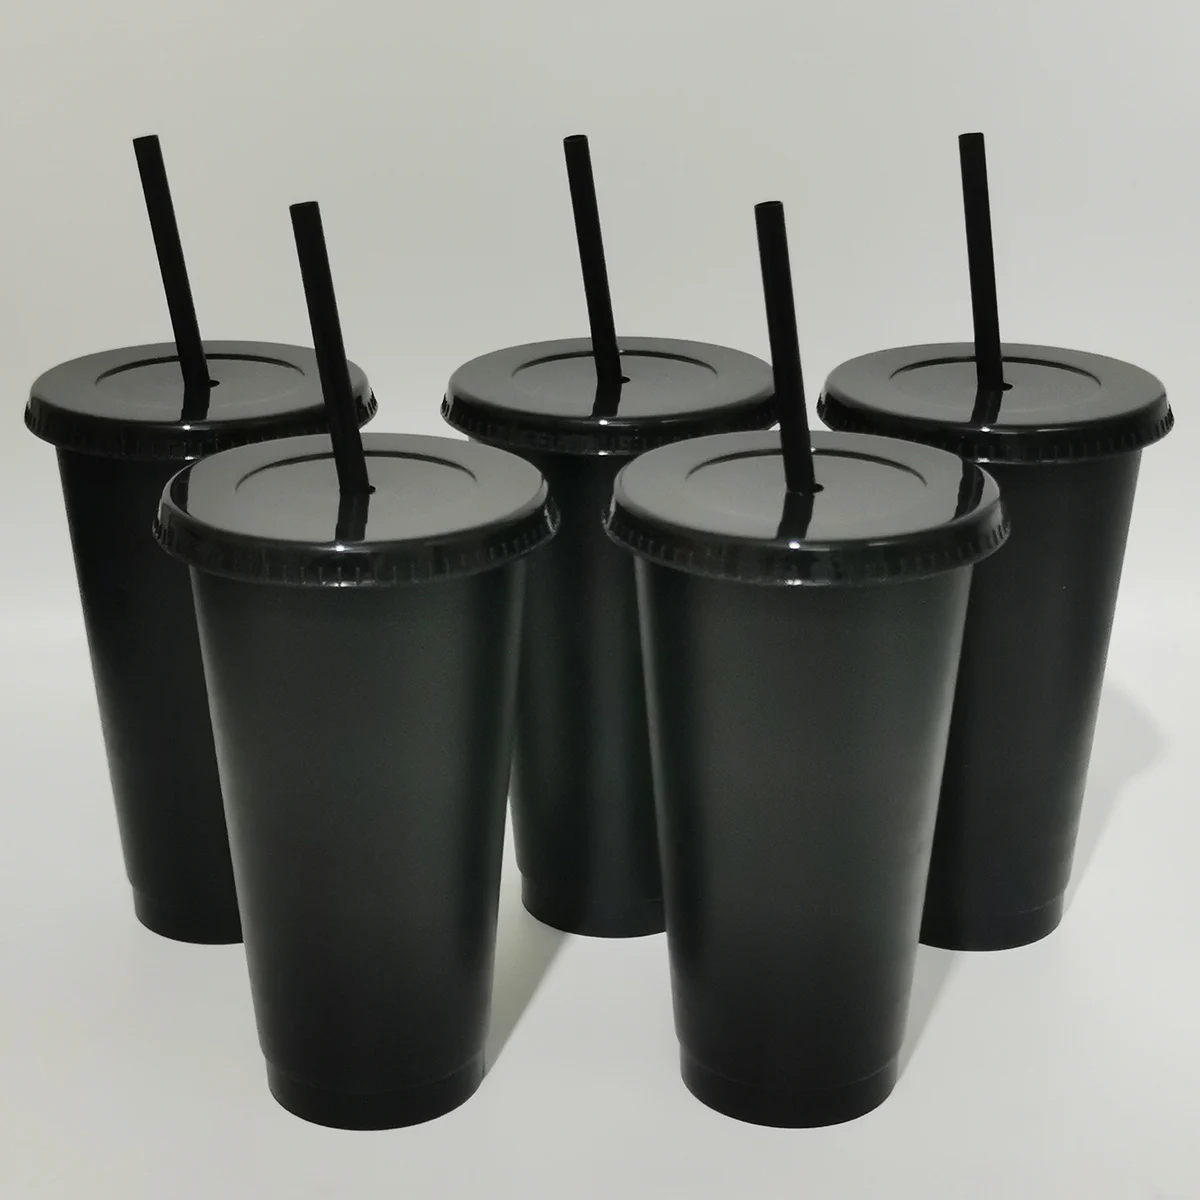 https://ae01.alicdn.com/kf/S32284aaa215948f69cfab636745e19a8R/5-Pcs-Reusable-Plastic-Cups-with-Straw-and-Lid-24oz-Durable-Water-Cup-Tumblers-Water-Bottle.jpg